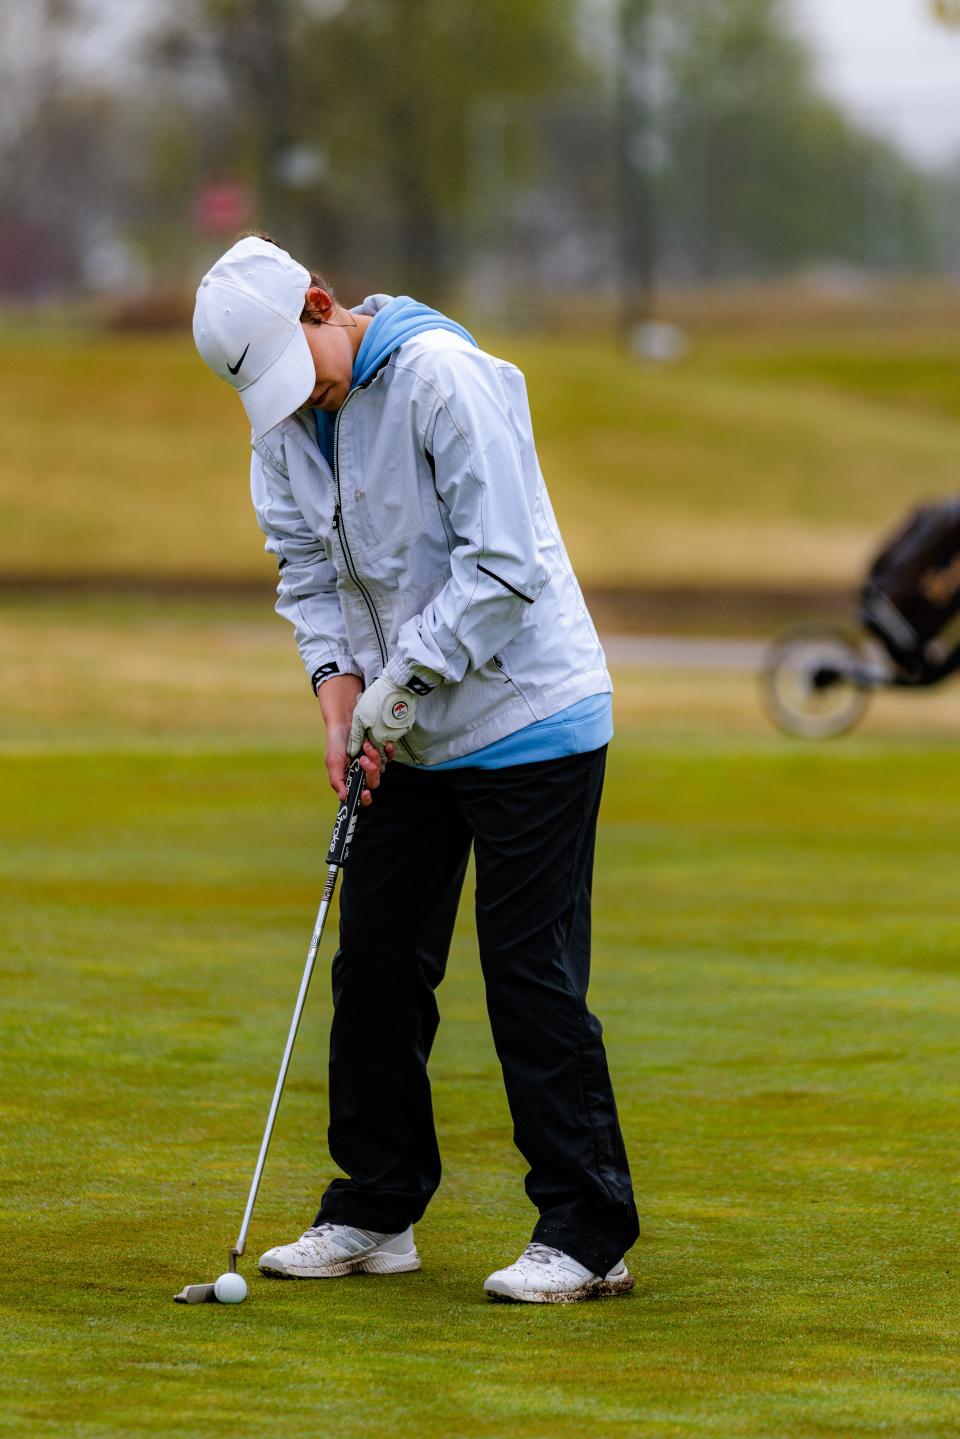 Bartlesville's Grace Lumpkin putts it in for a birdie on the 9th hole at Adams Golf Course during an April 20, 2022 competition.